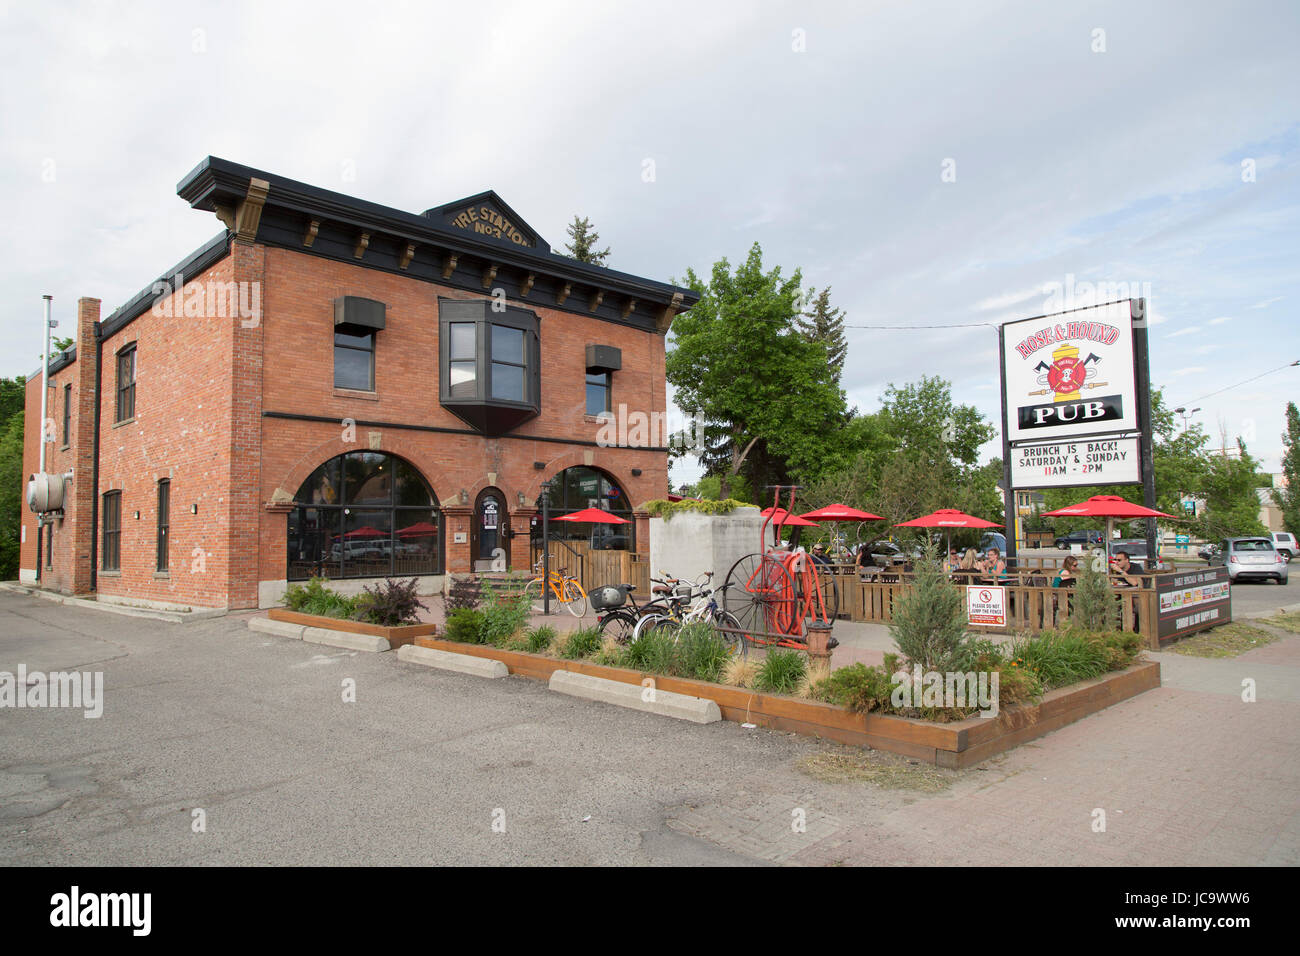 The Rose and Hound pub at the Inglewood district of Calgary, Canada. Inglewood is one of the oldest districts in Calgary. Stock Photo